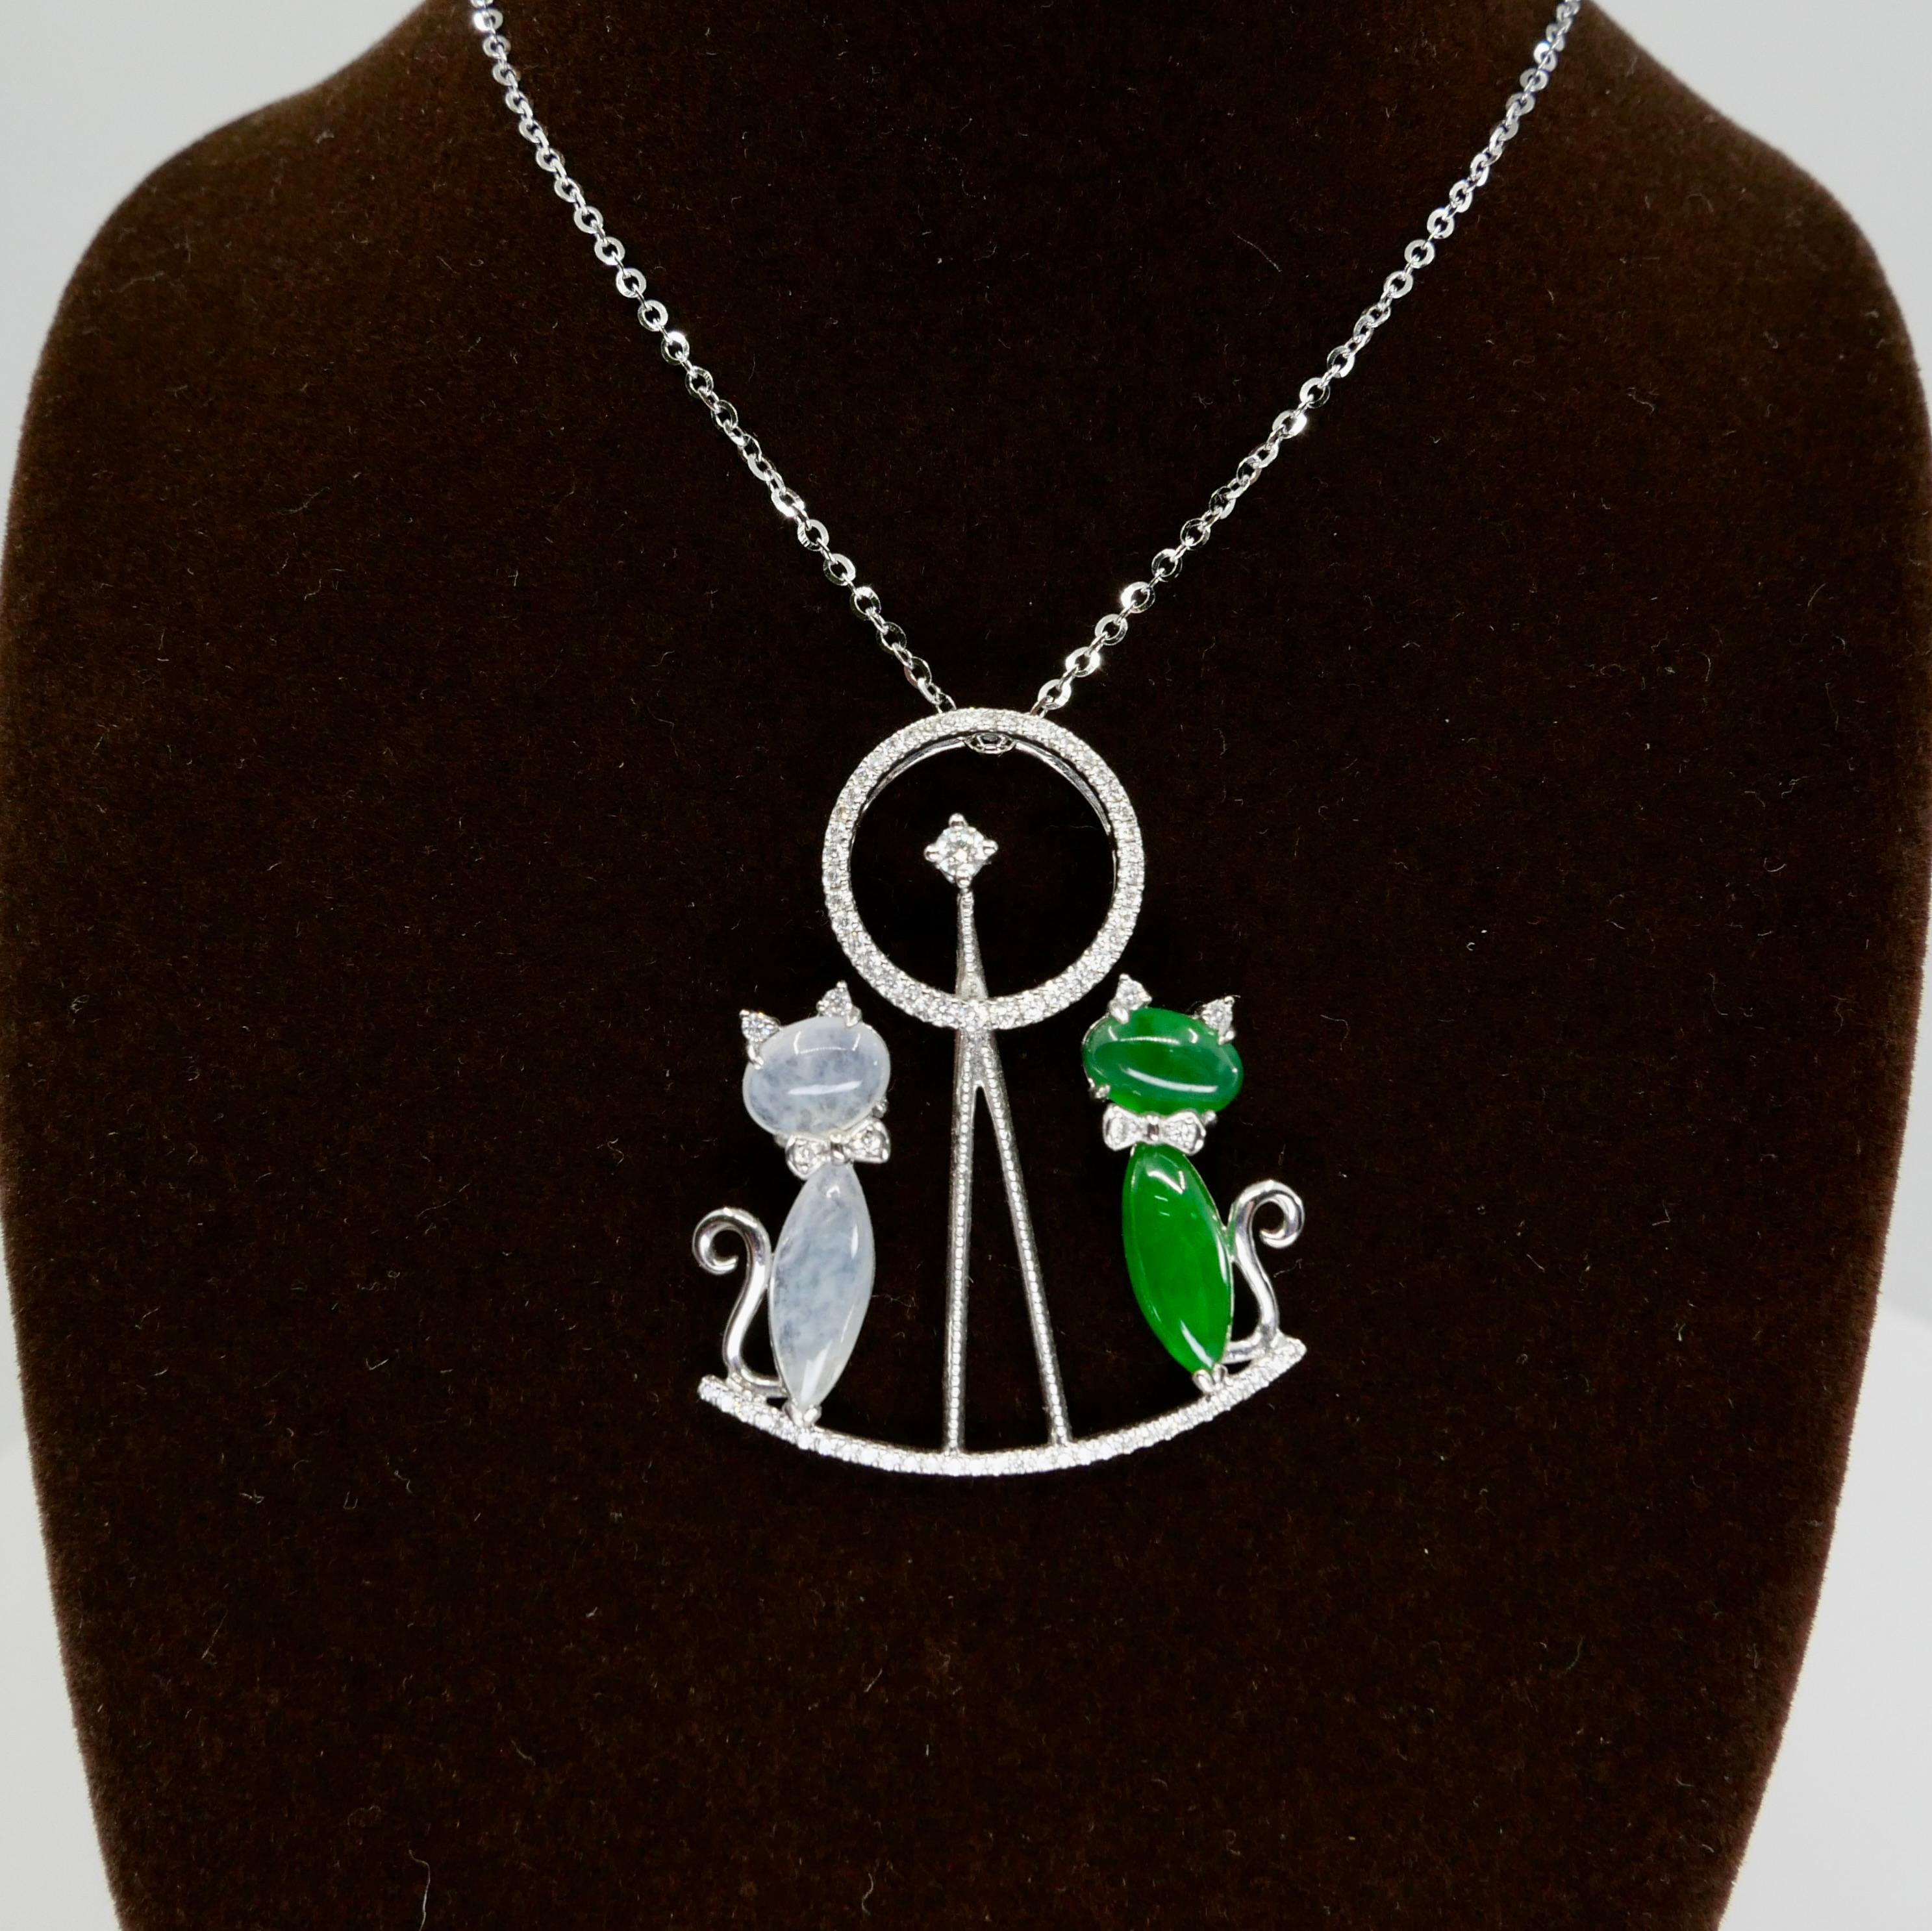 Certified Icy & Apple Green Jade & Diamond Pendant Necklace, Cats on a Seesaw For Sale 2